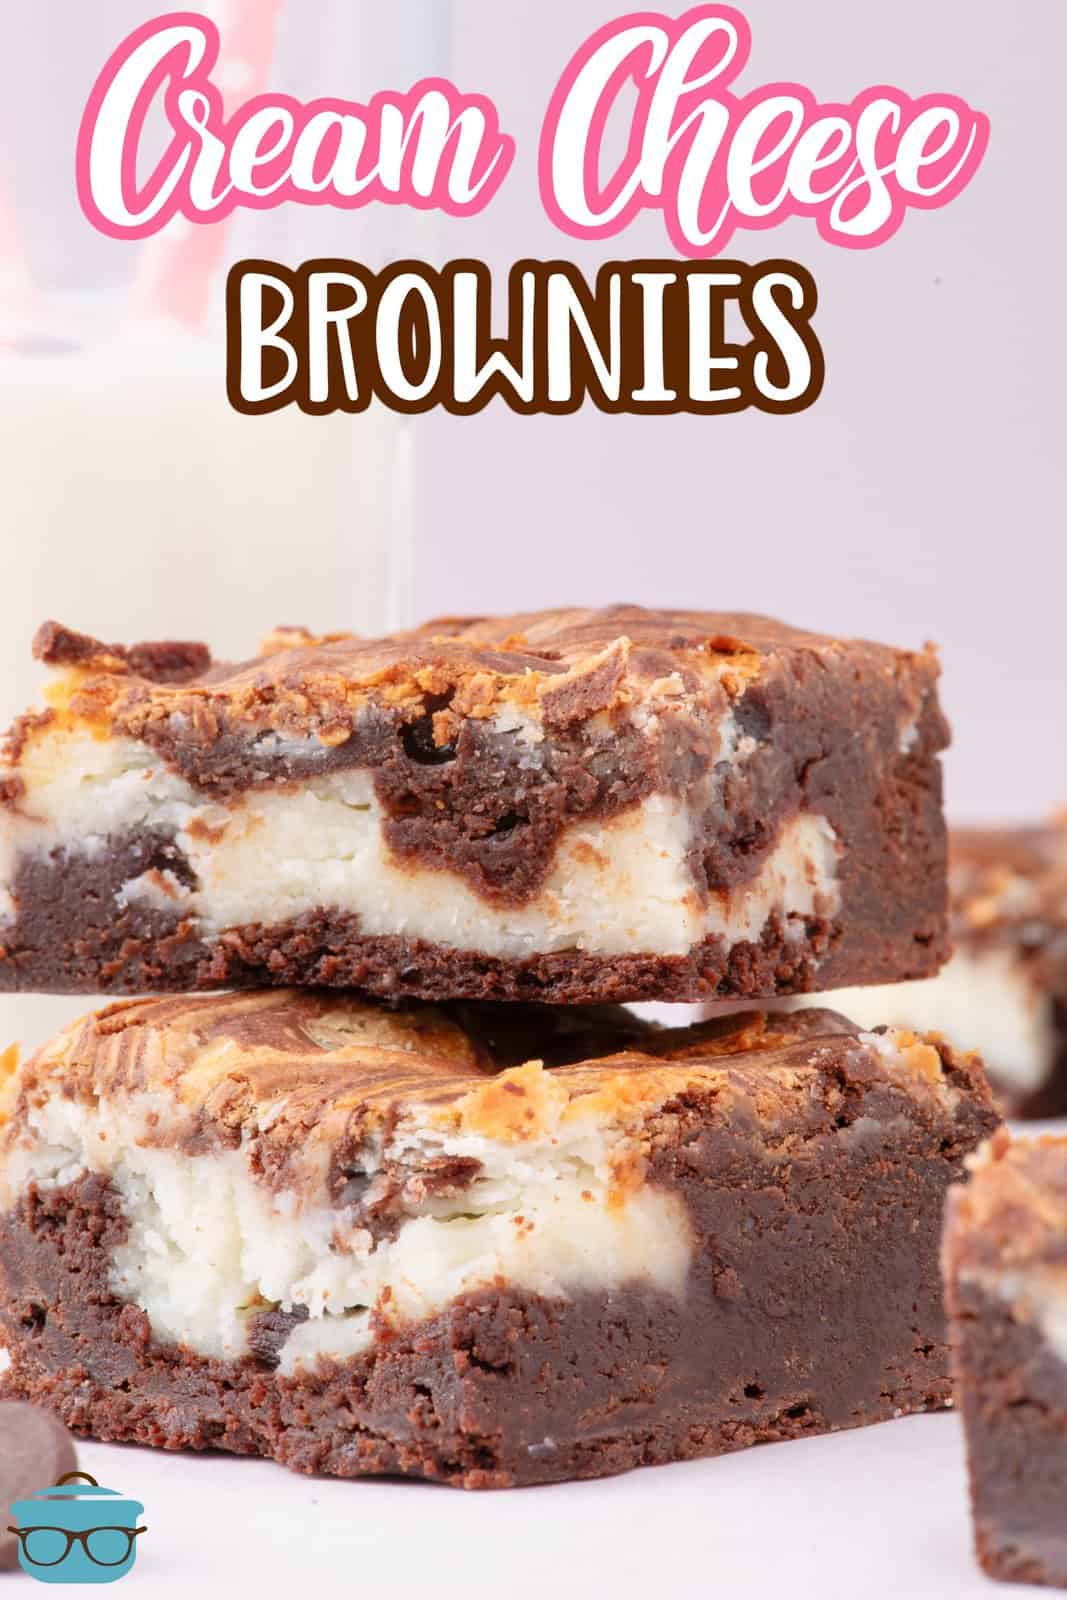 Two Fudgy Cream Cheese Brownies in a stack.